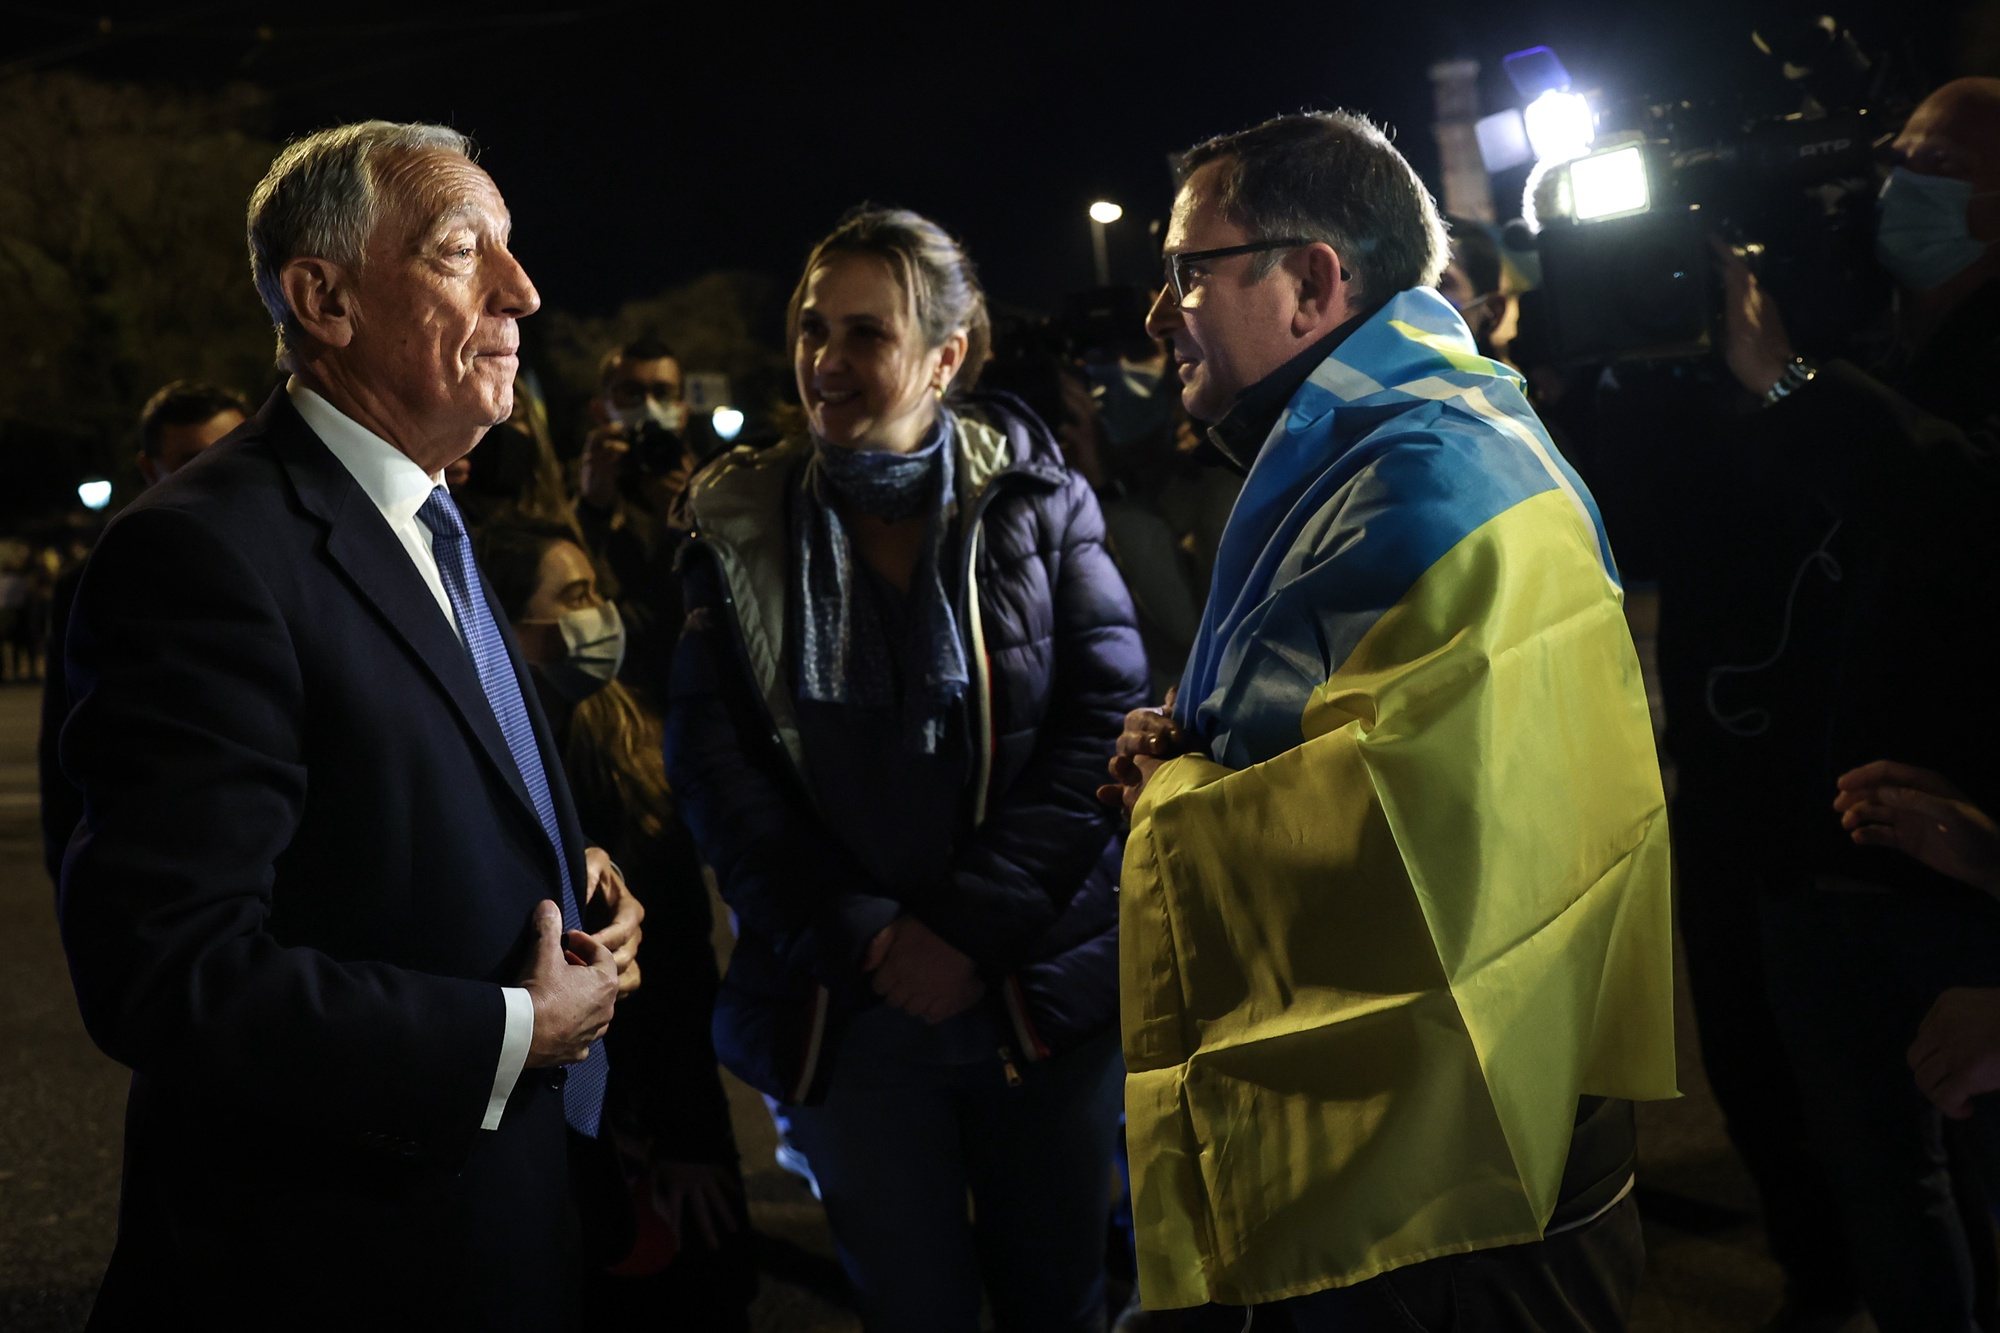 The Portuguese President of the Republic, Marcelo Rebelo de Sousa (L), takes part in the Human Cordon for Peace in Ukraine that gathered in front of  Belem Presidential Palace, Lisbon, Portugal, 26 February 2022. RODRIGO ANTUNES/LUSA